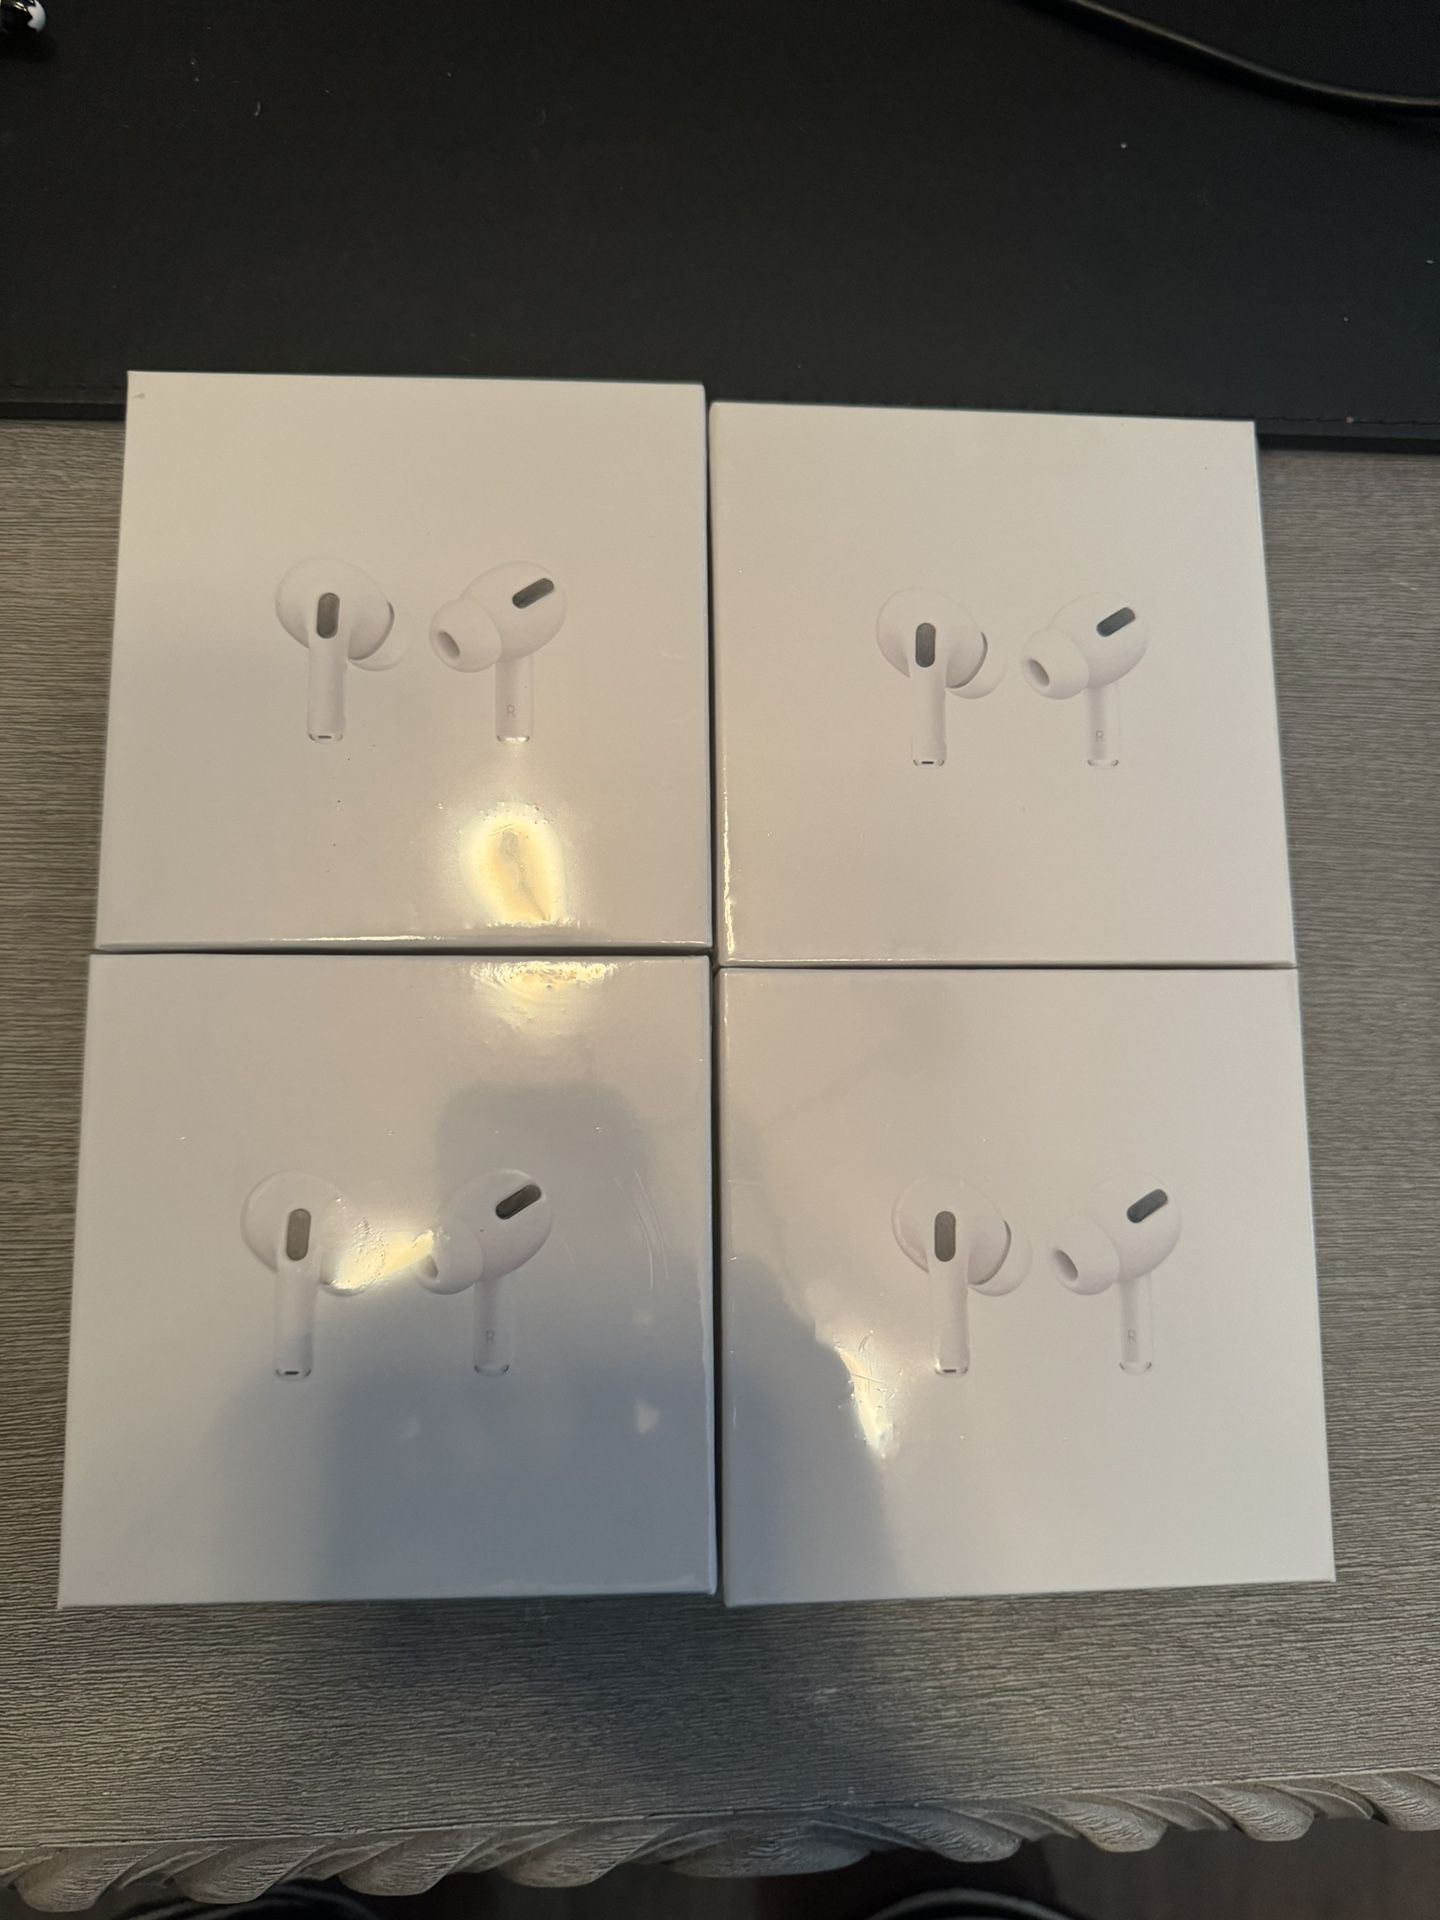 4 Sealed AirPods Pro - $60 For All 4